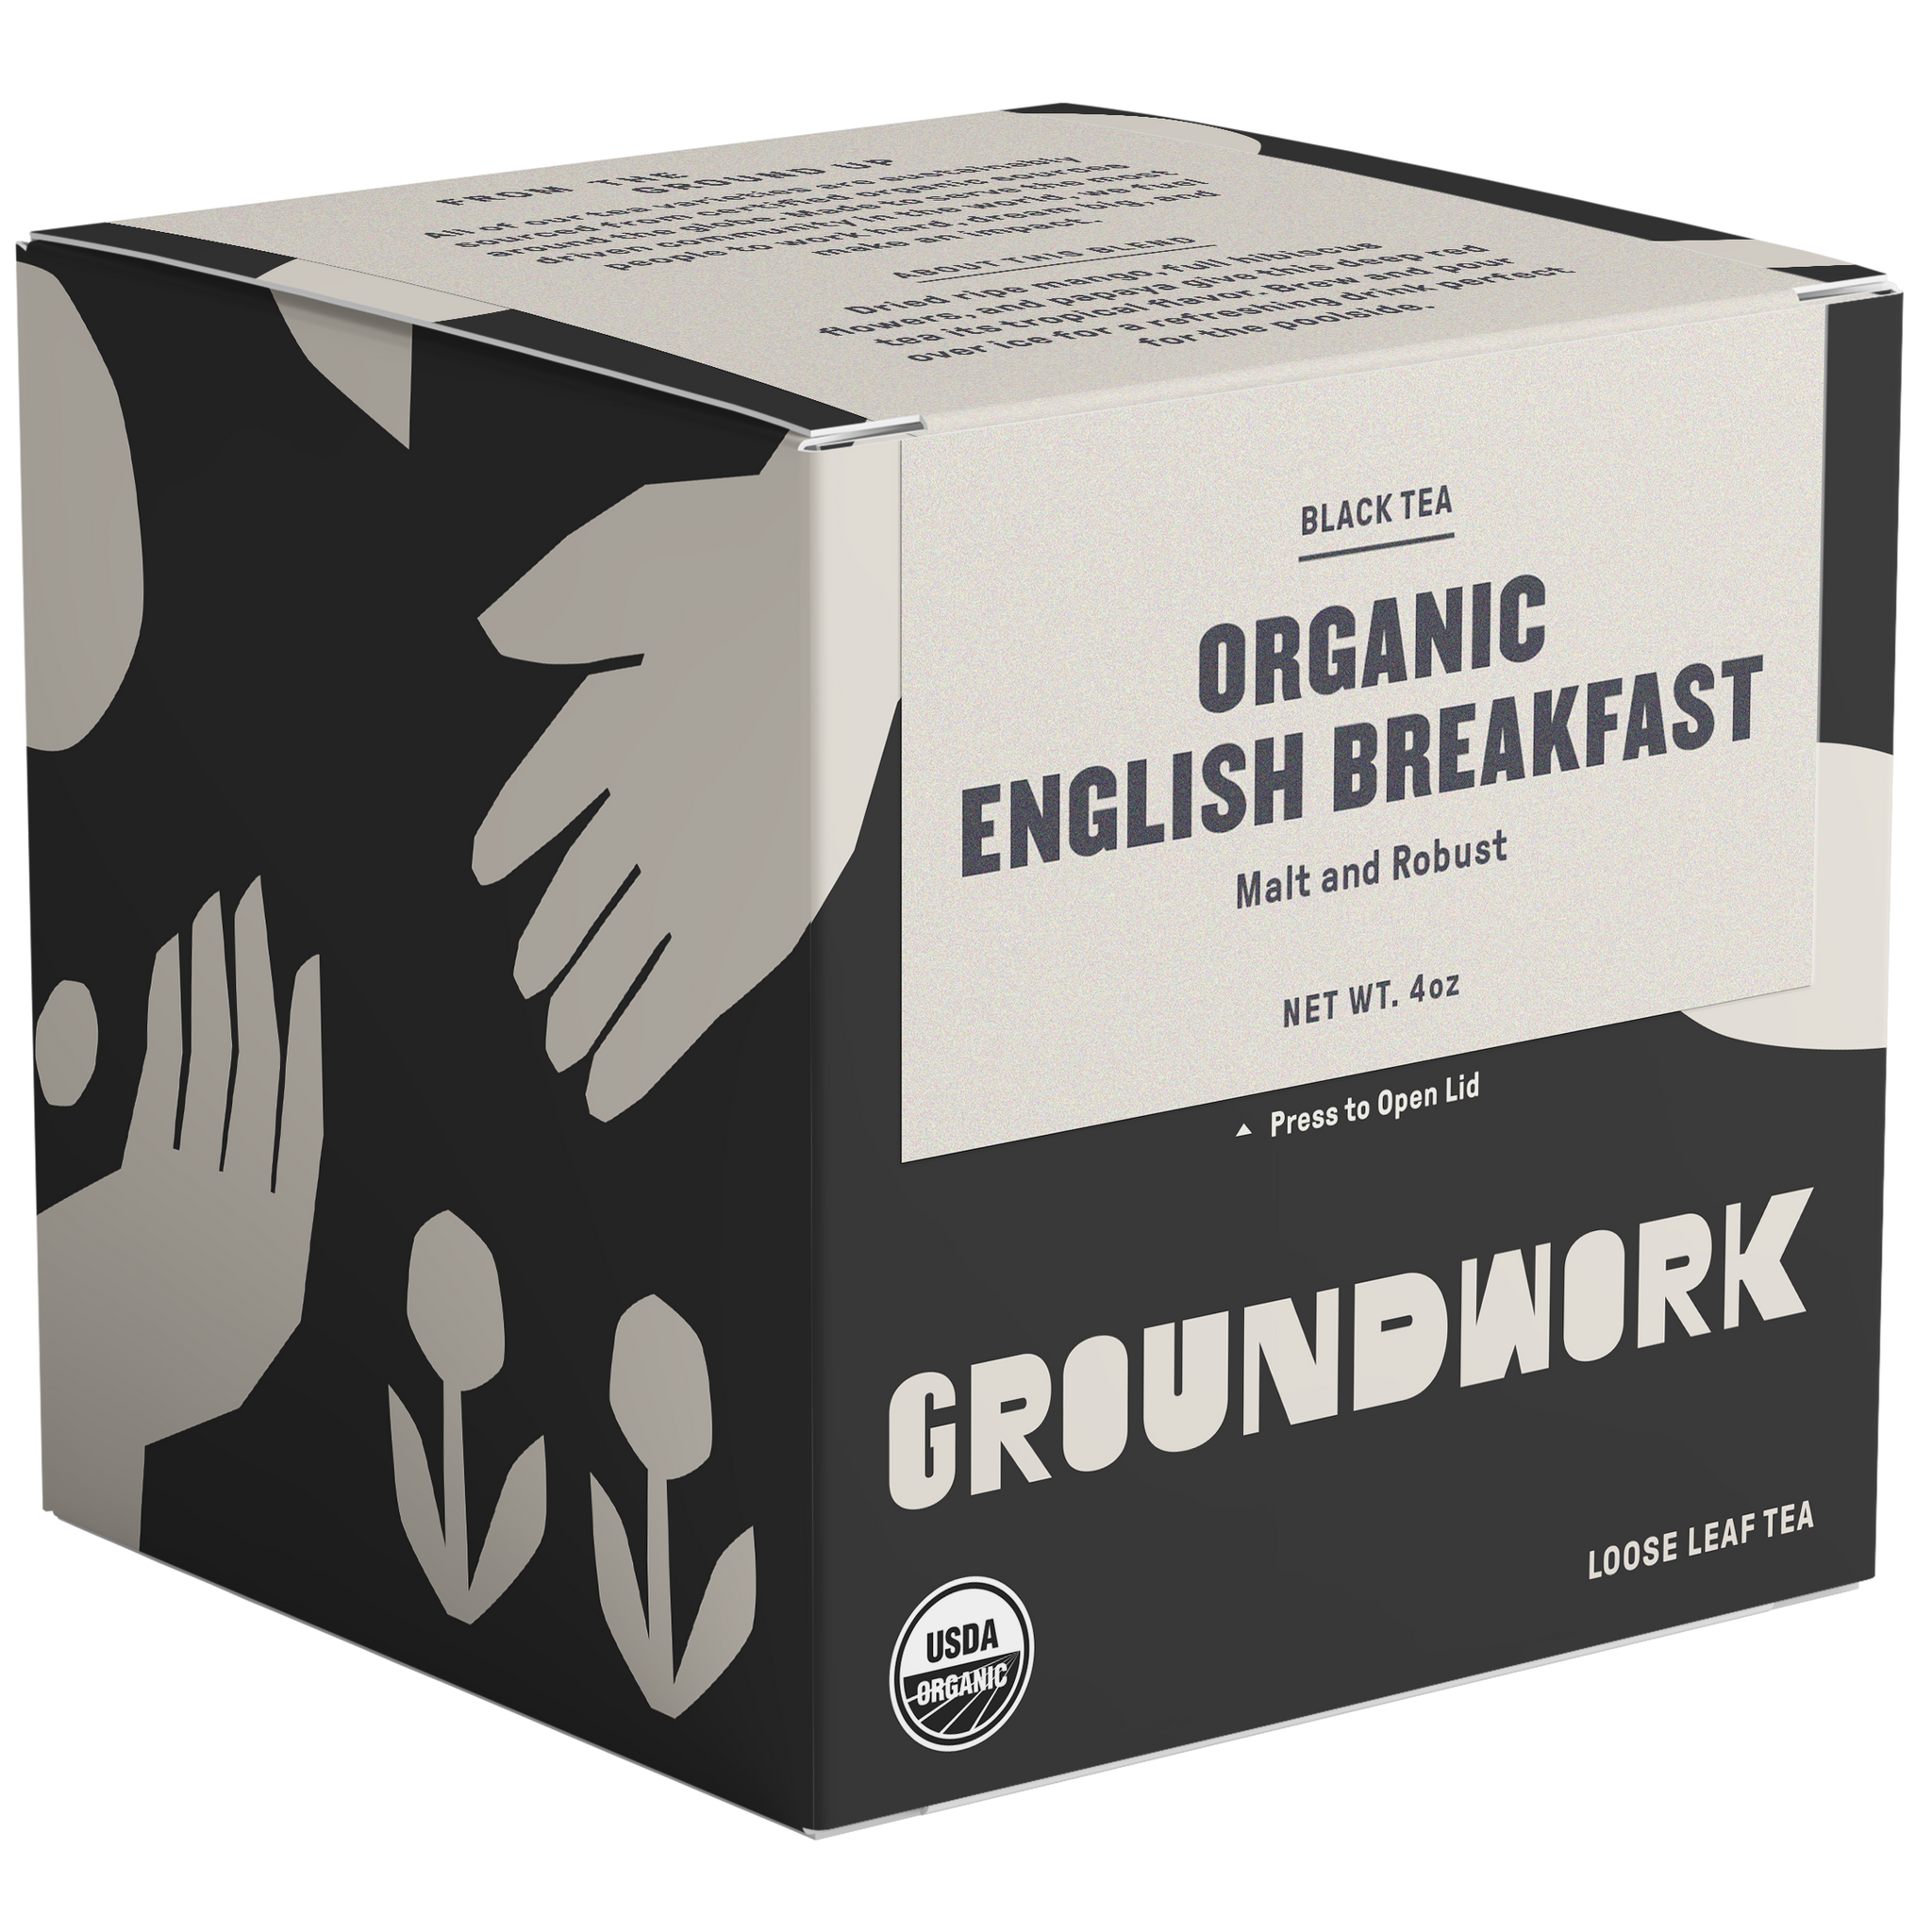 Organic english breakfast tea with notes of Malt and Robust.